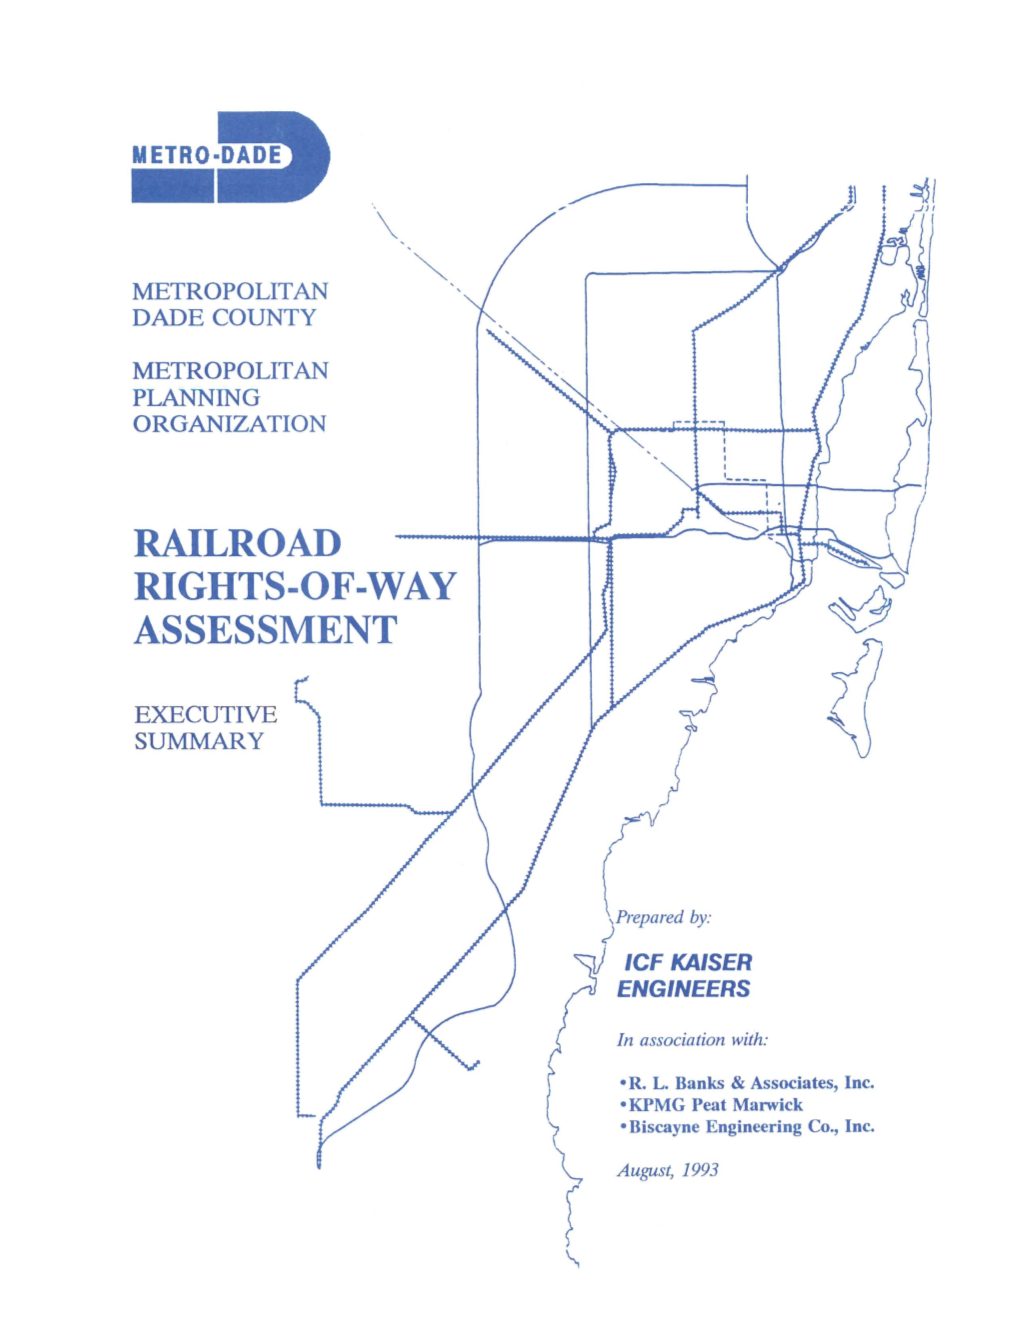 Railroad Rights-Of-Way Assessment Executive Summary, August 1993